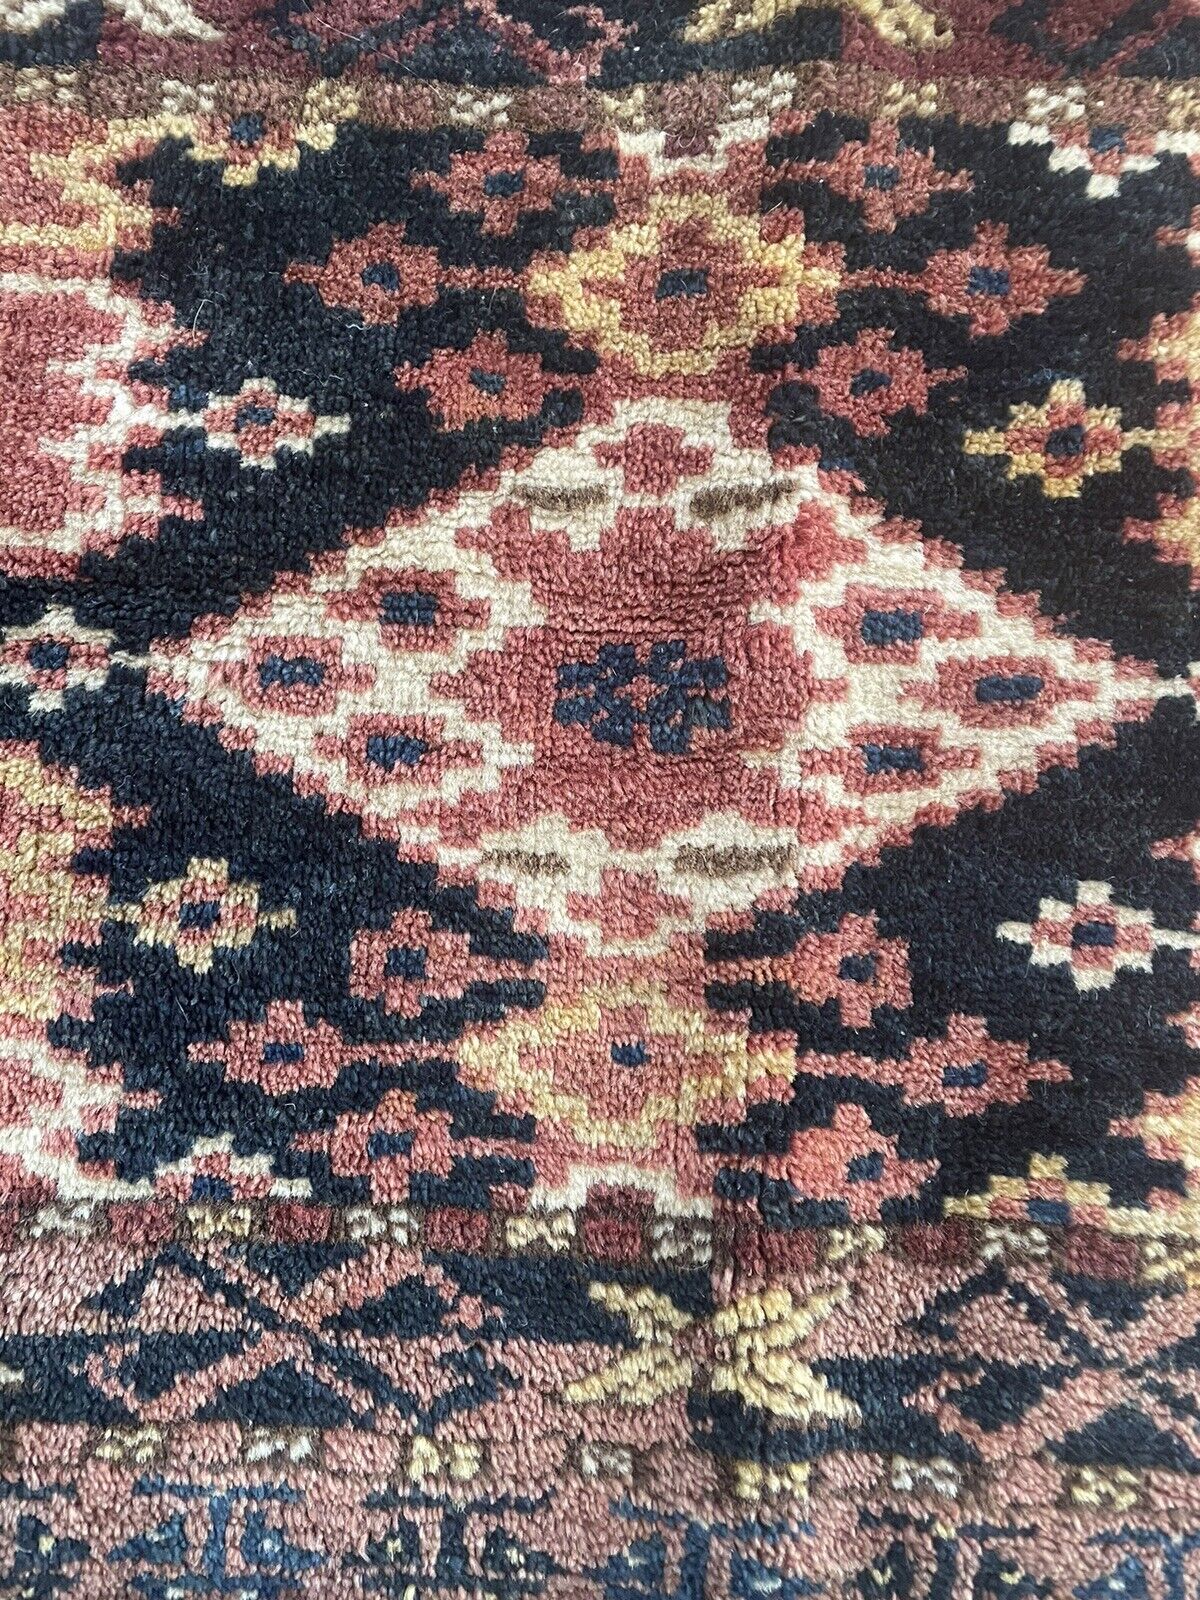 Close-up of historical significance on Handmade Antique Afghan Beshir Collectible Chuval Rug - Detailed view emphasizing the rug's historical significance as a rare gem from the 1900s, carrying the spirit of its origin and cultural heritage.